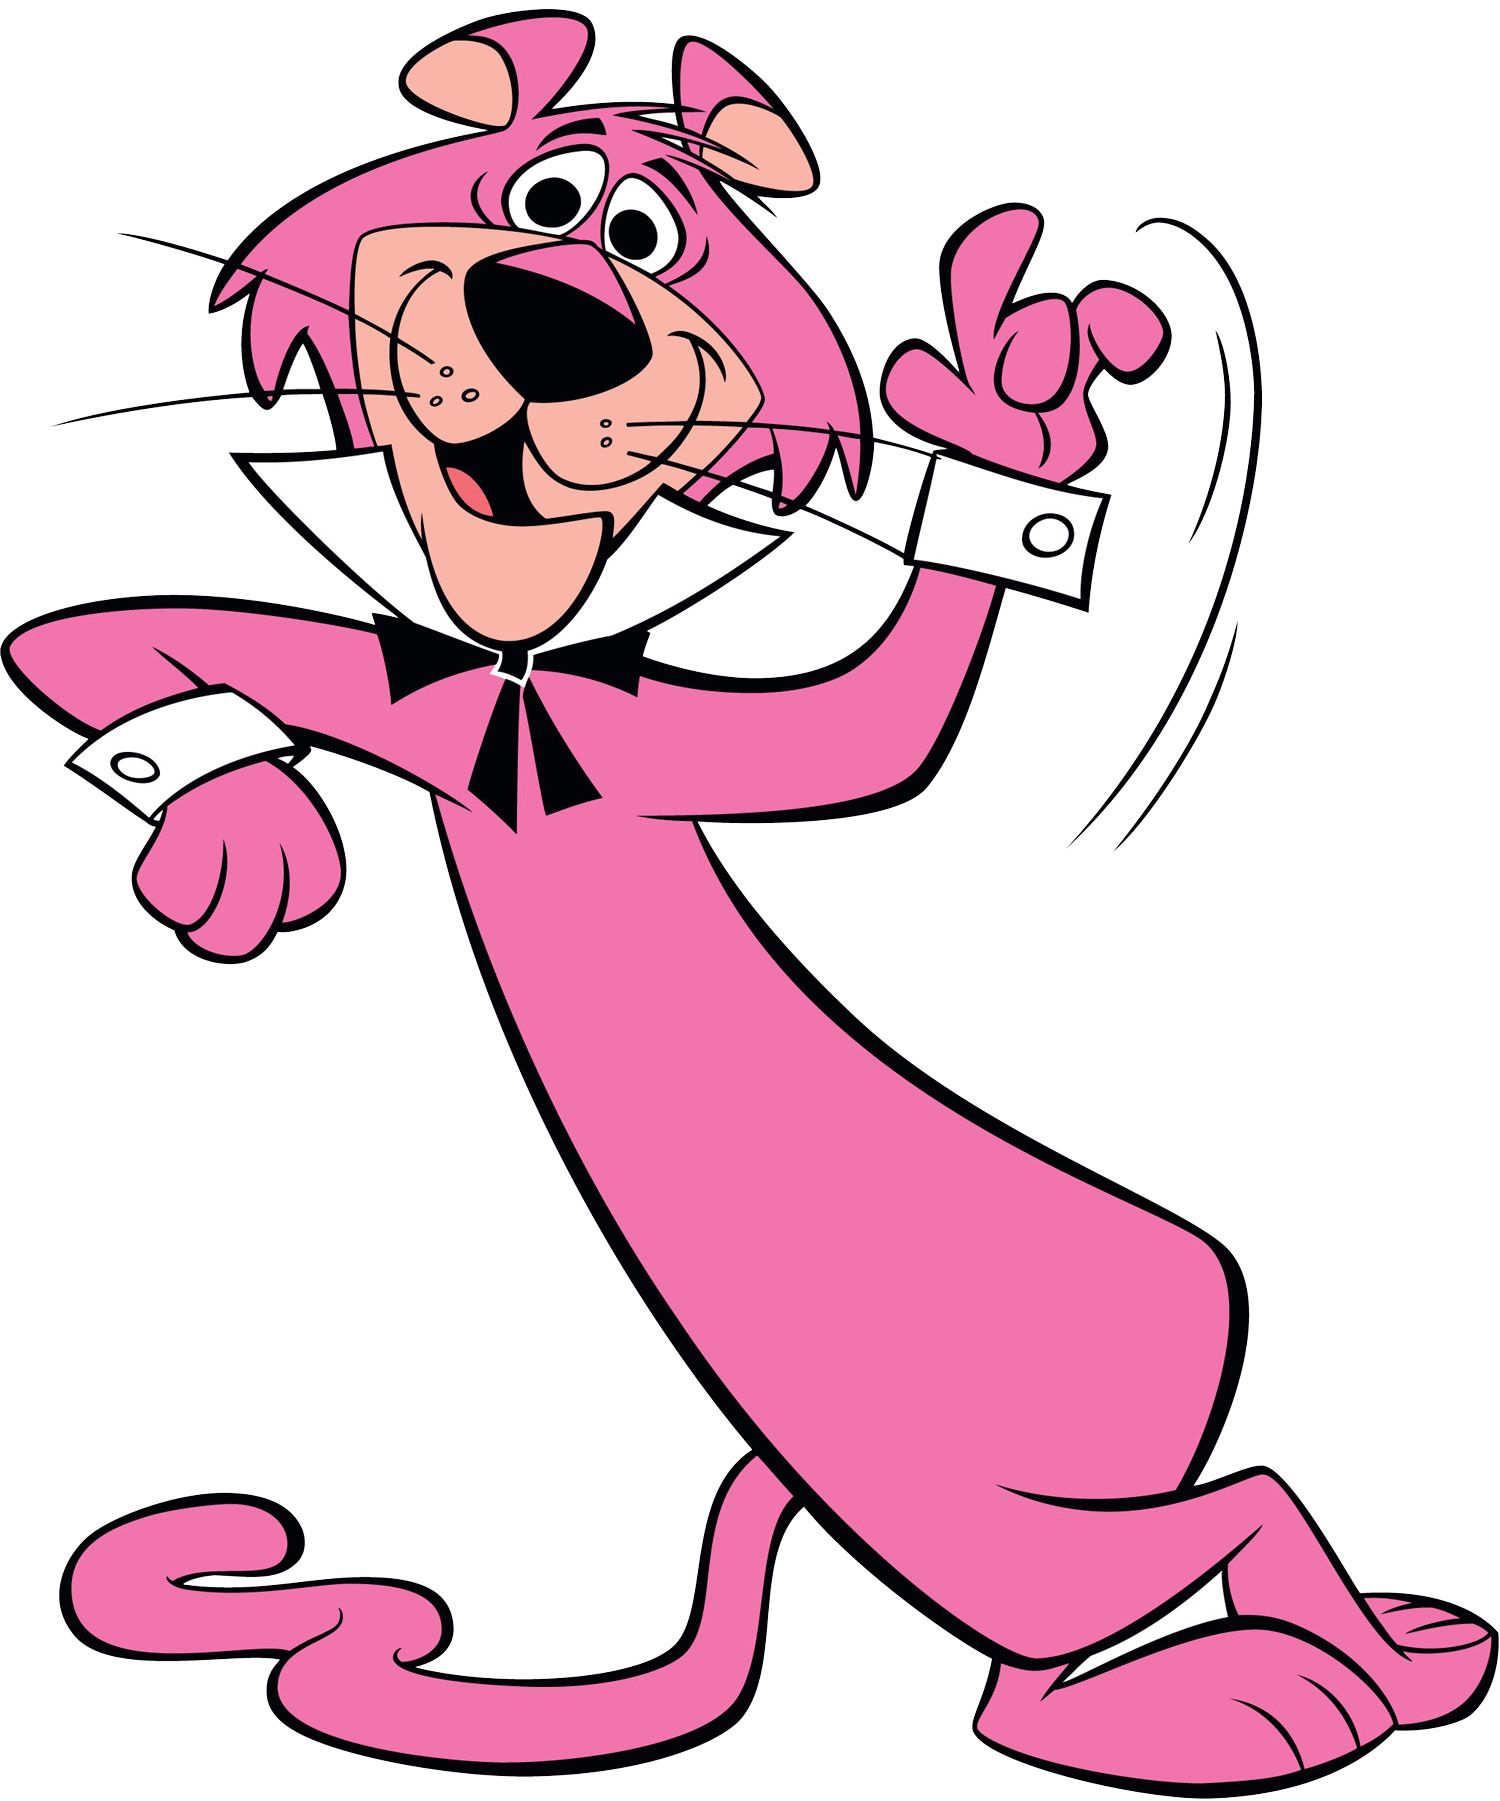 Snagglepuss The Amazing World Of Gumball Crossover Wiki